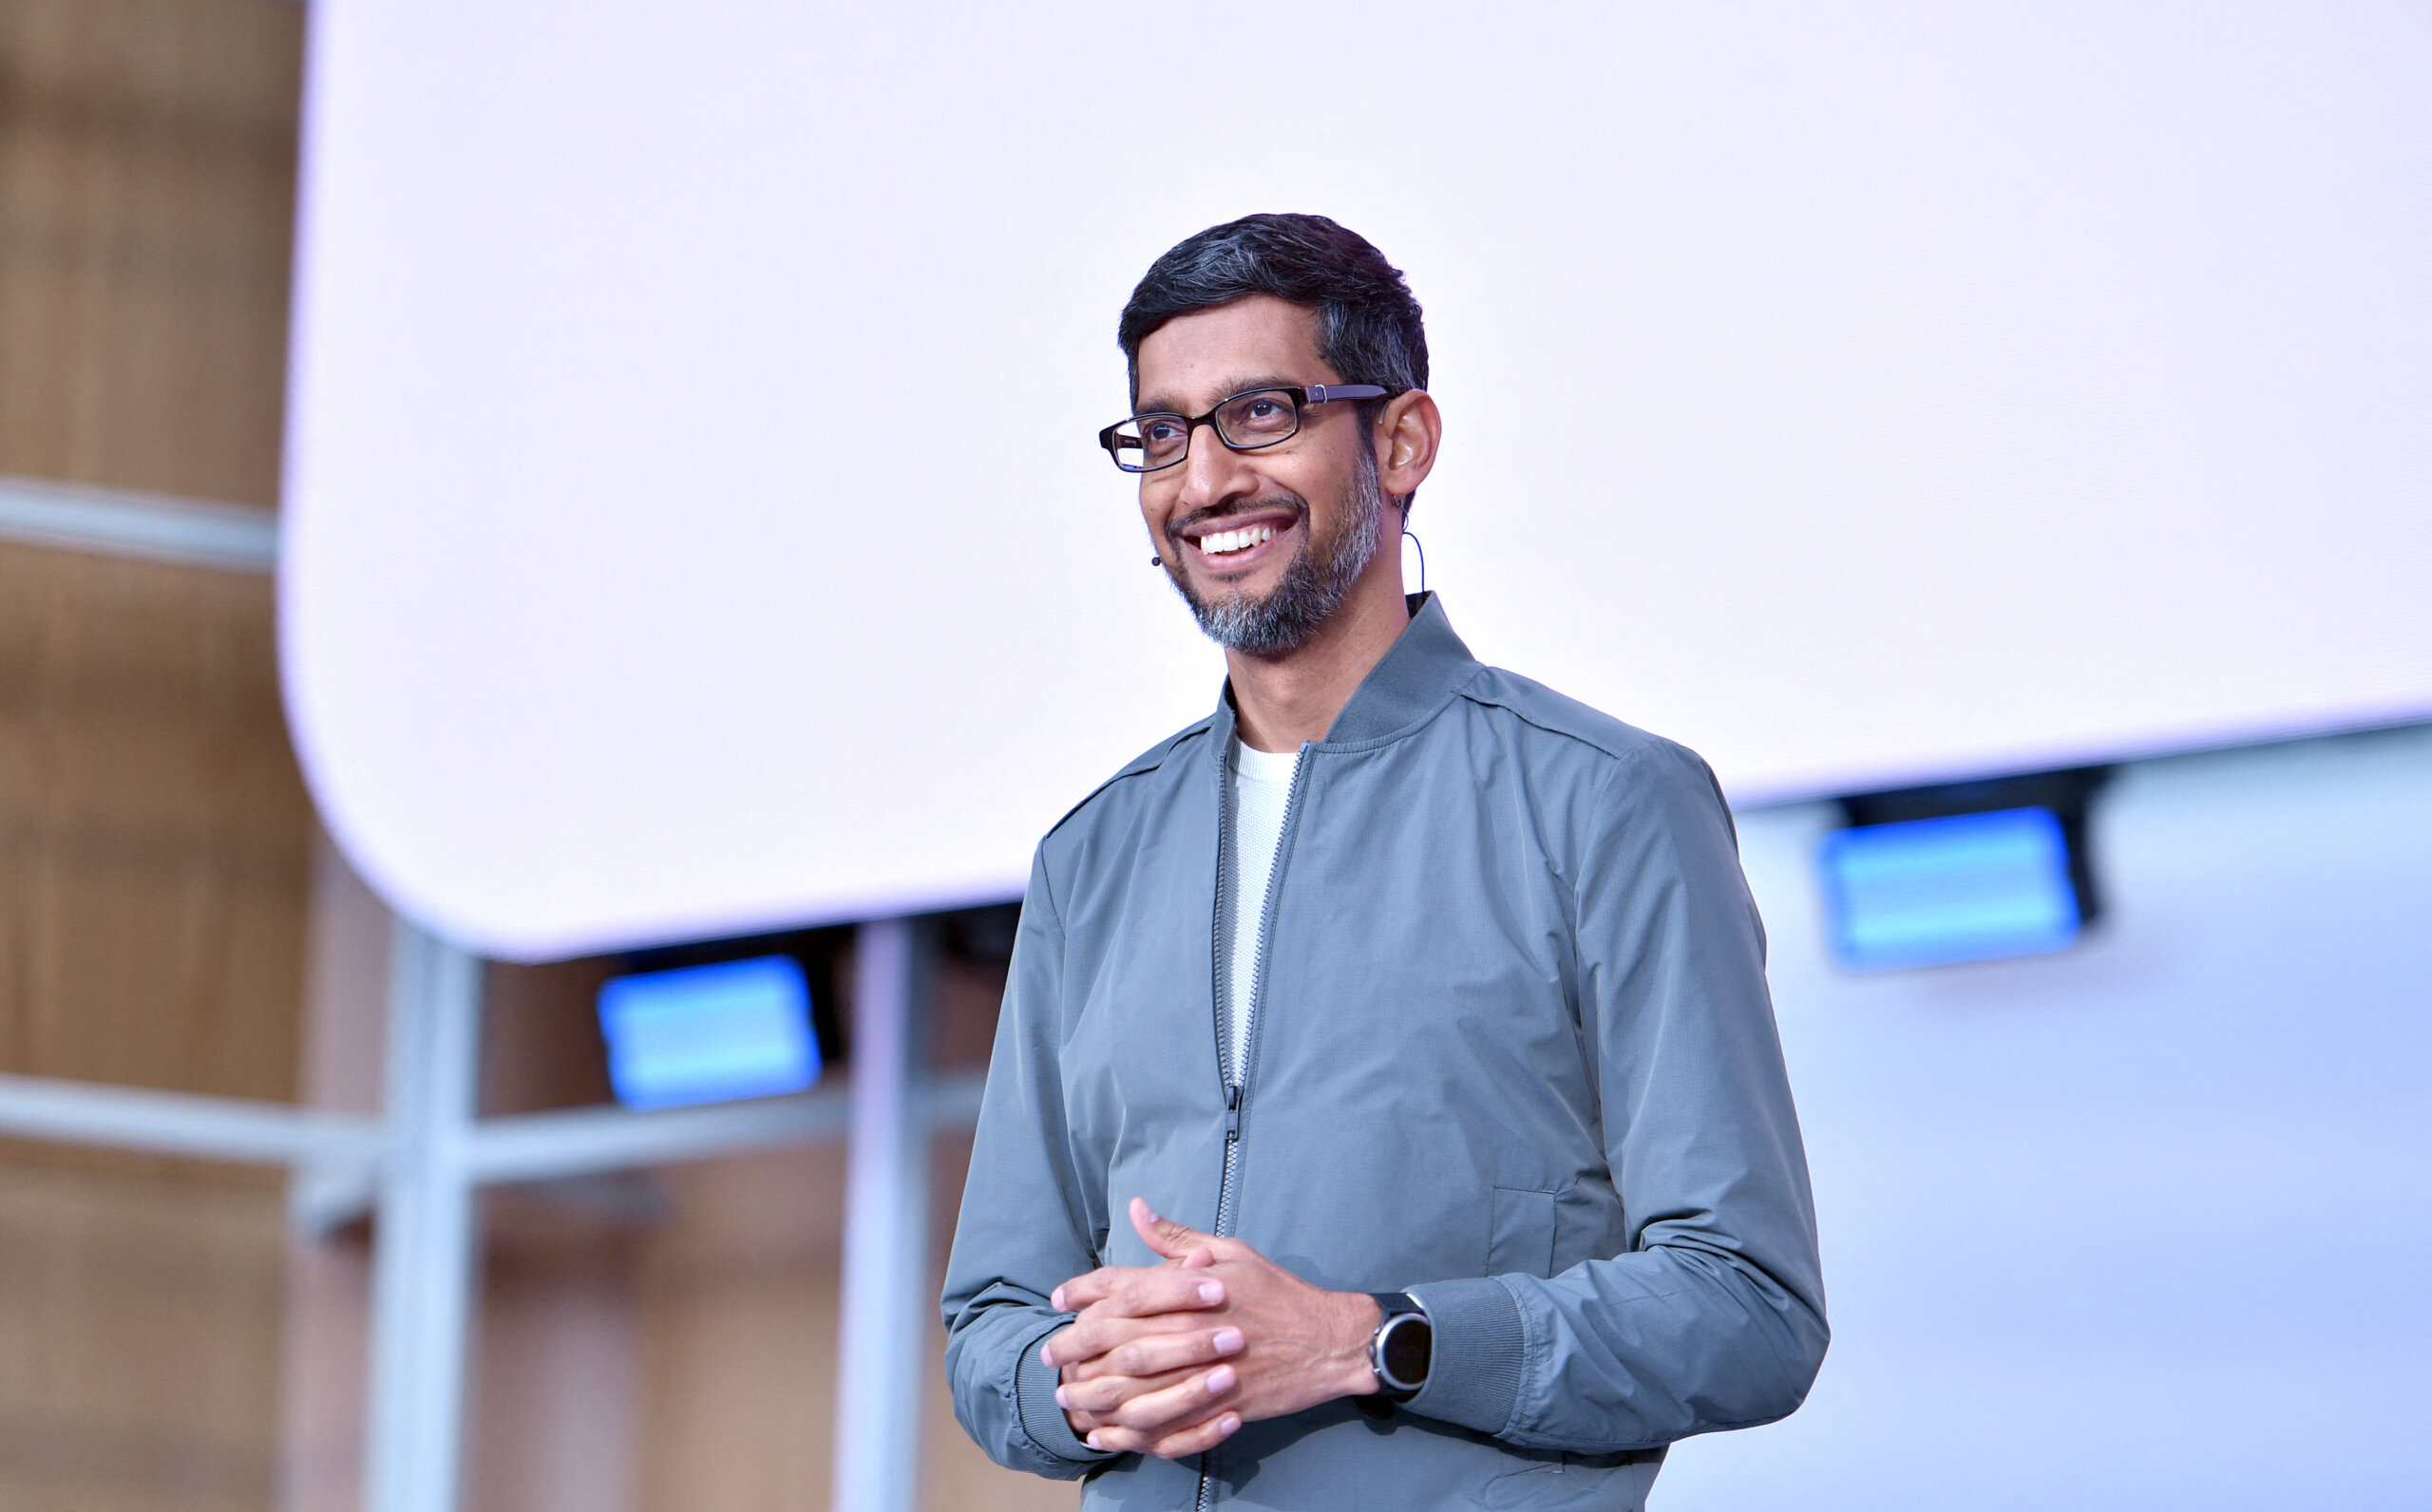 Google is coming up with a ChatGPT rival to take on Microsoft